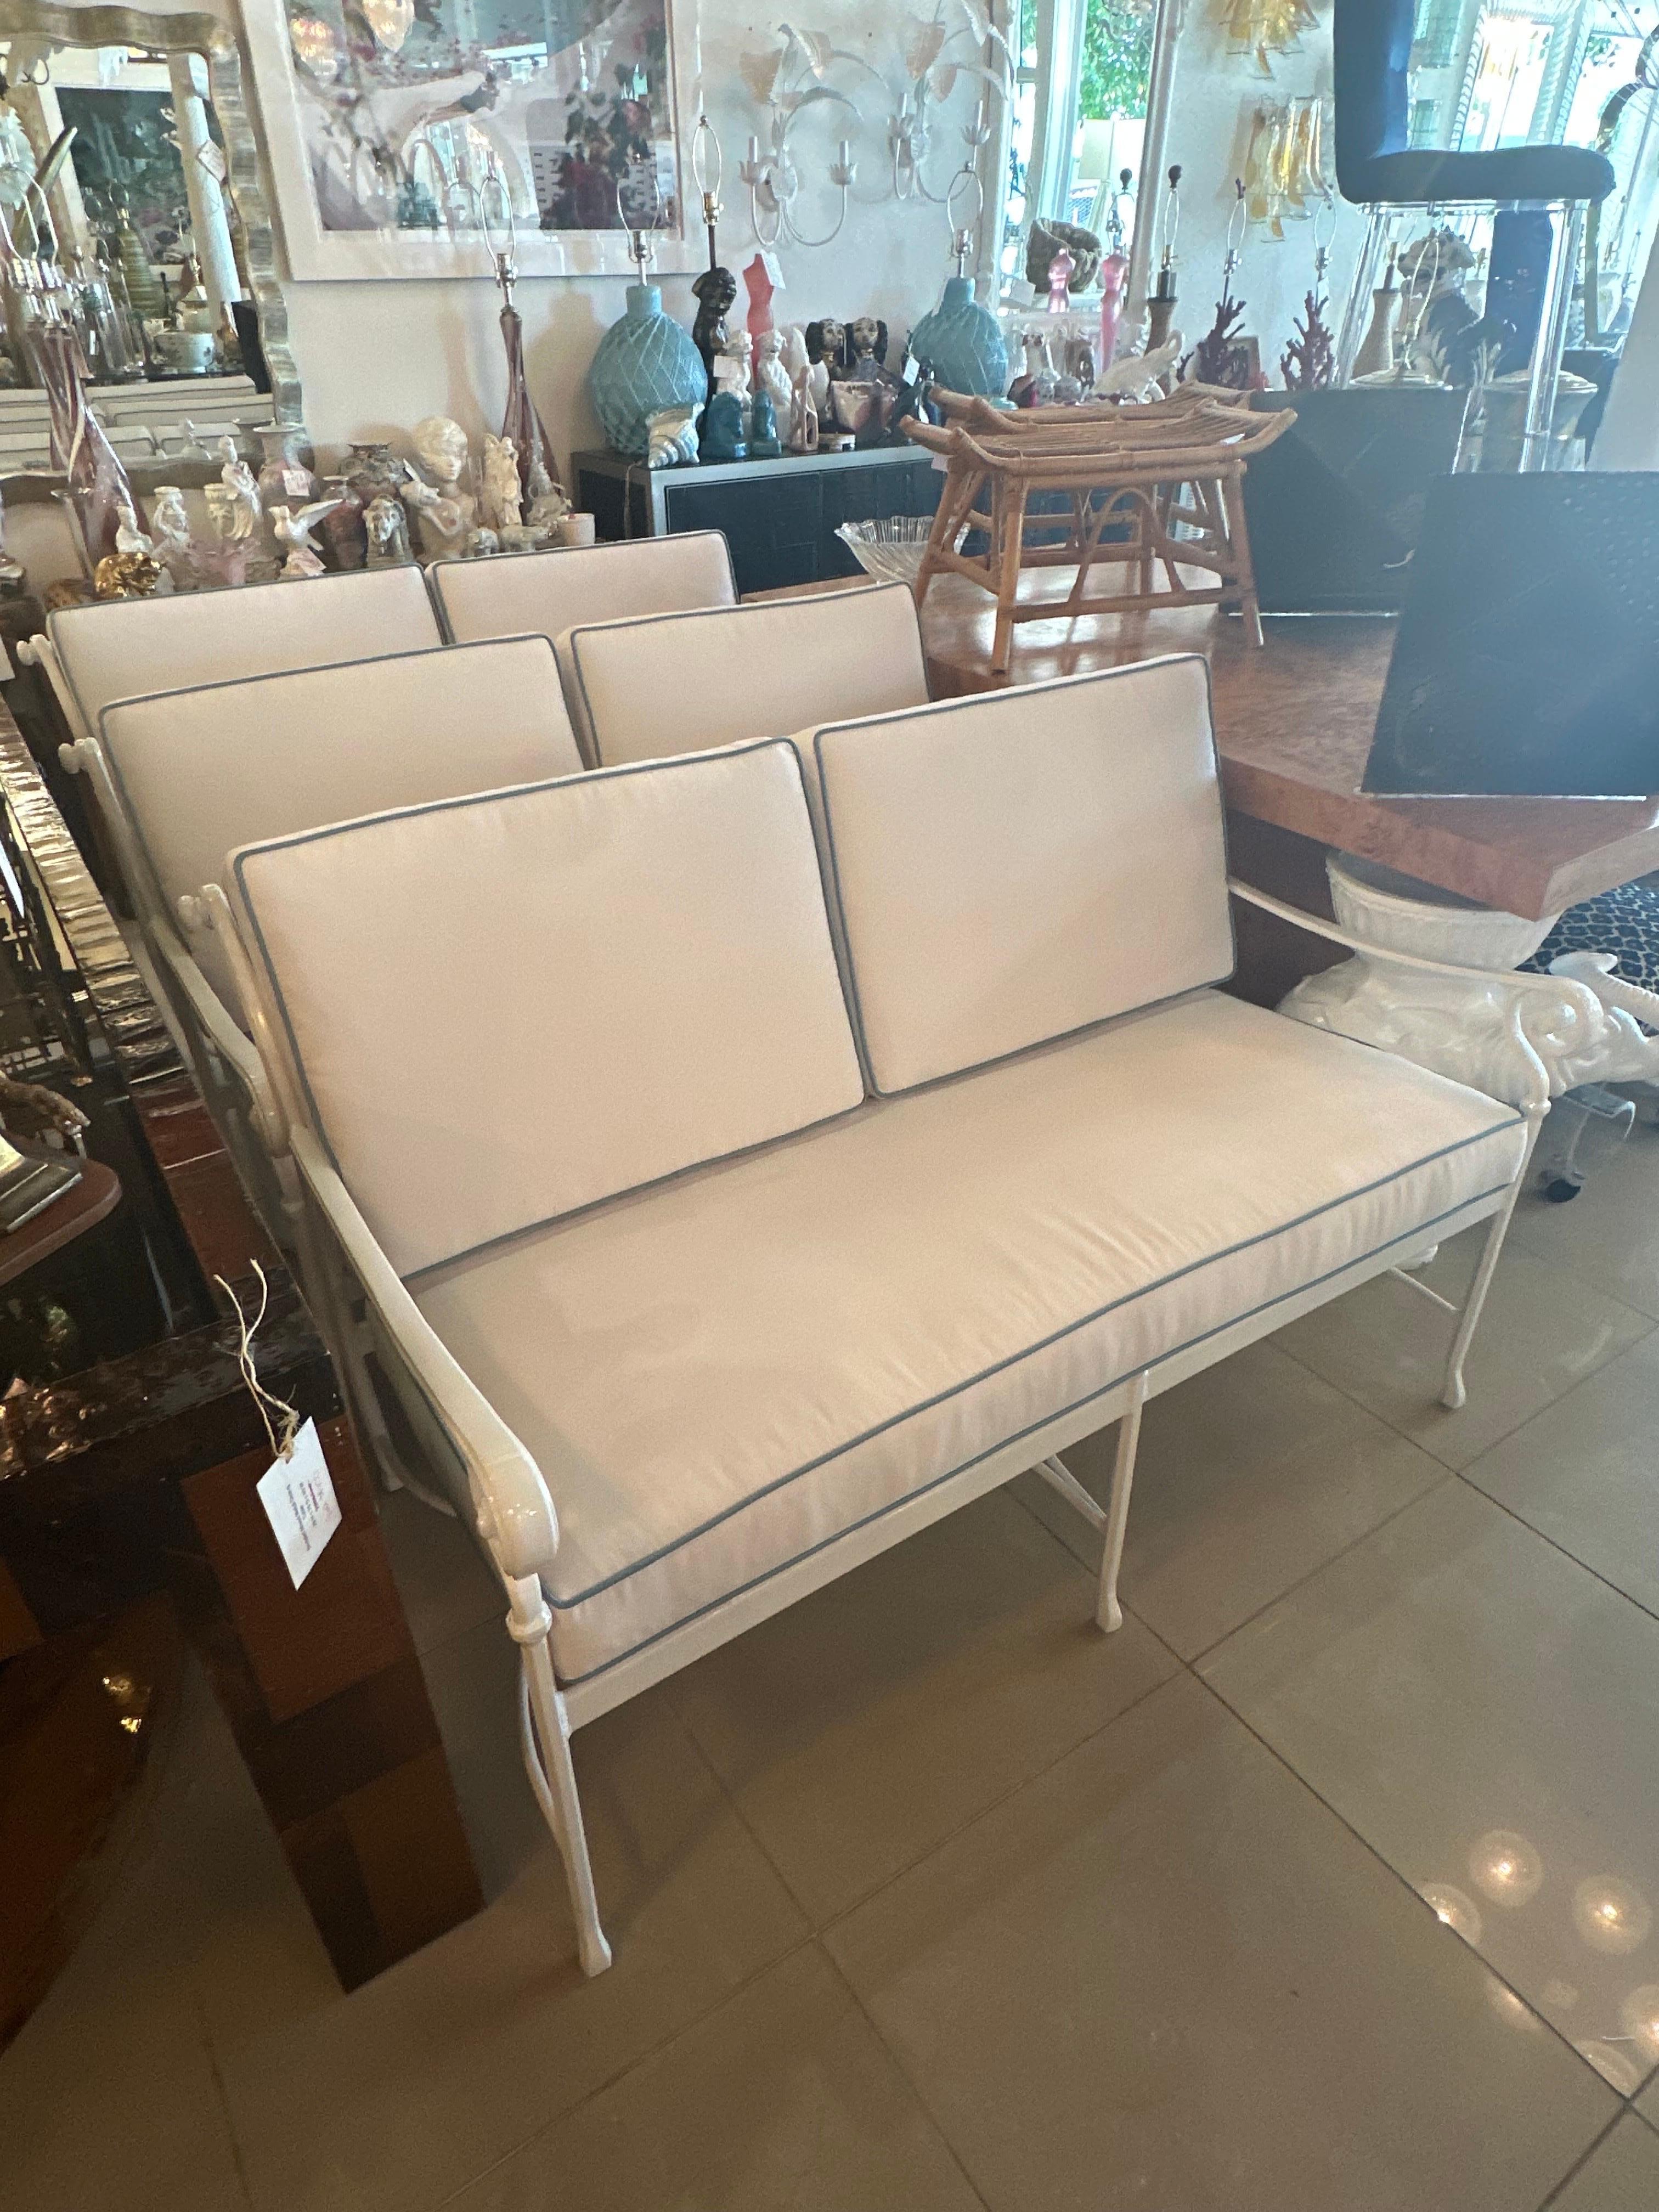 Beautiful vintage metal loveseat sofa for your patio outdoor sunroom. This has been completely restored! Newly powder-coated in a fresh white. All new custom cushions including new foam, zippers, Sunbrella white outdoor fabric with Sunbrella blue